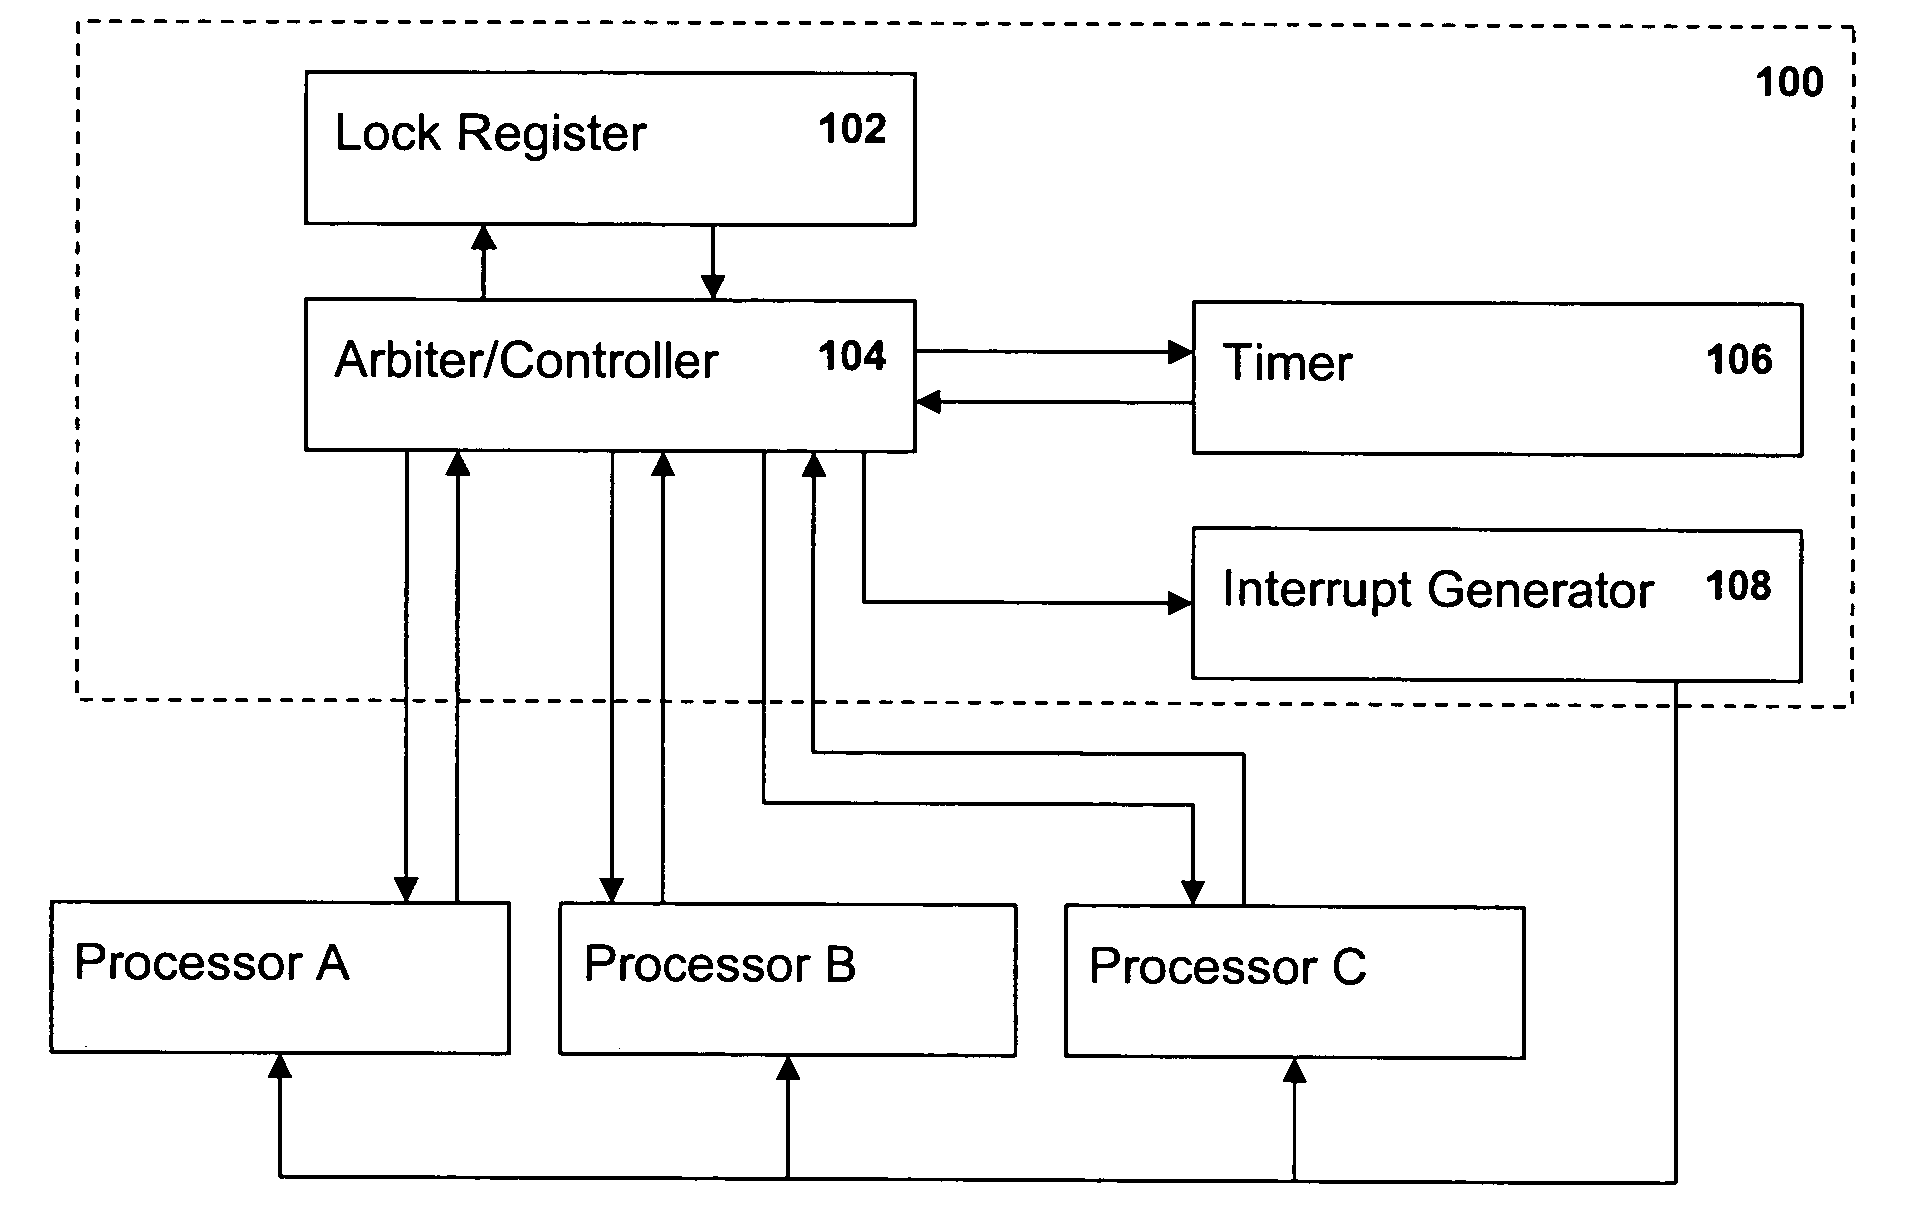 Management of microcode lock in a shared computing resource